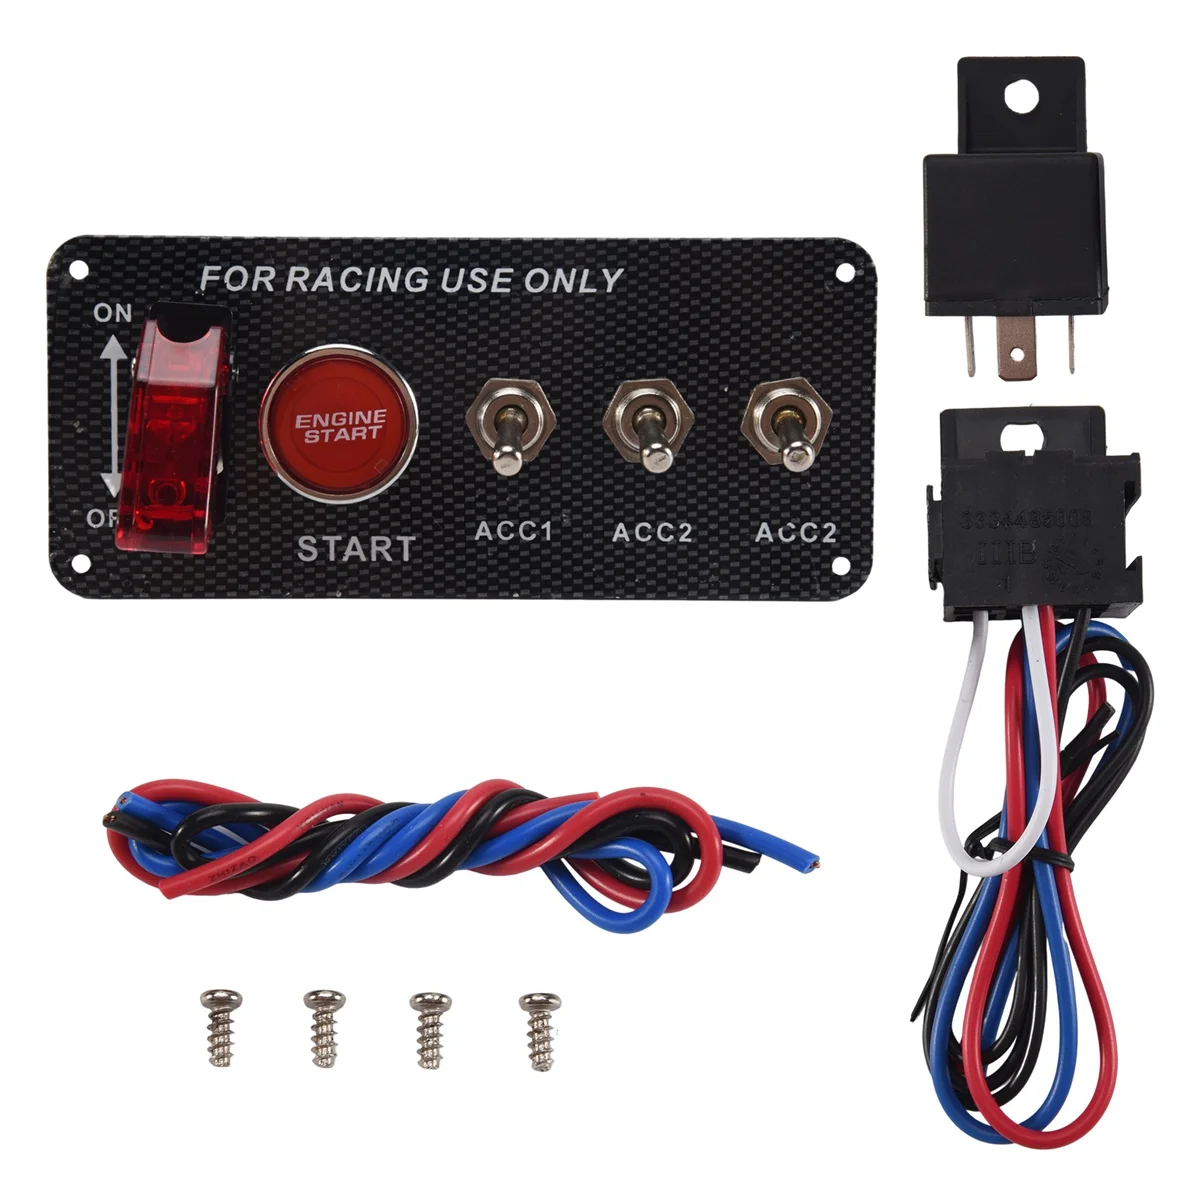 

12V Car Ignition Switch Engine Start Push Button 3 Toggle Racing Panel